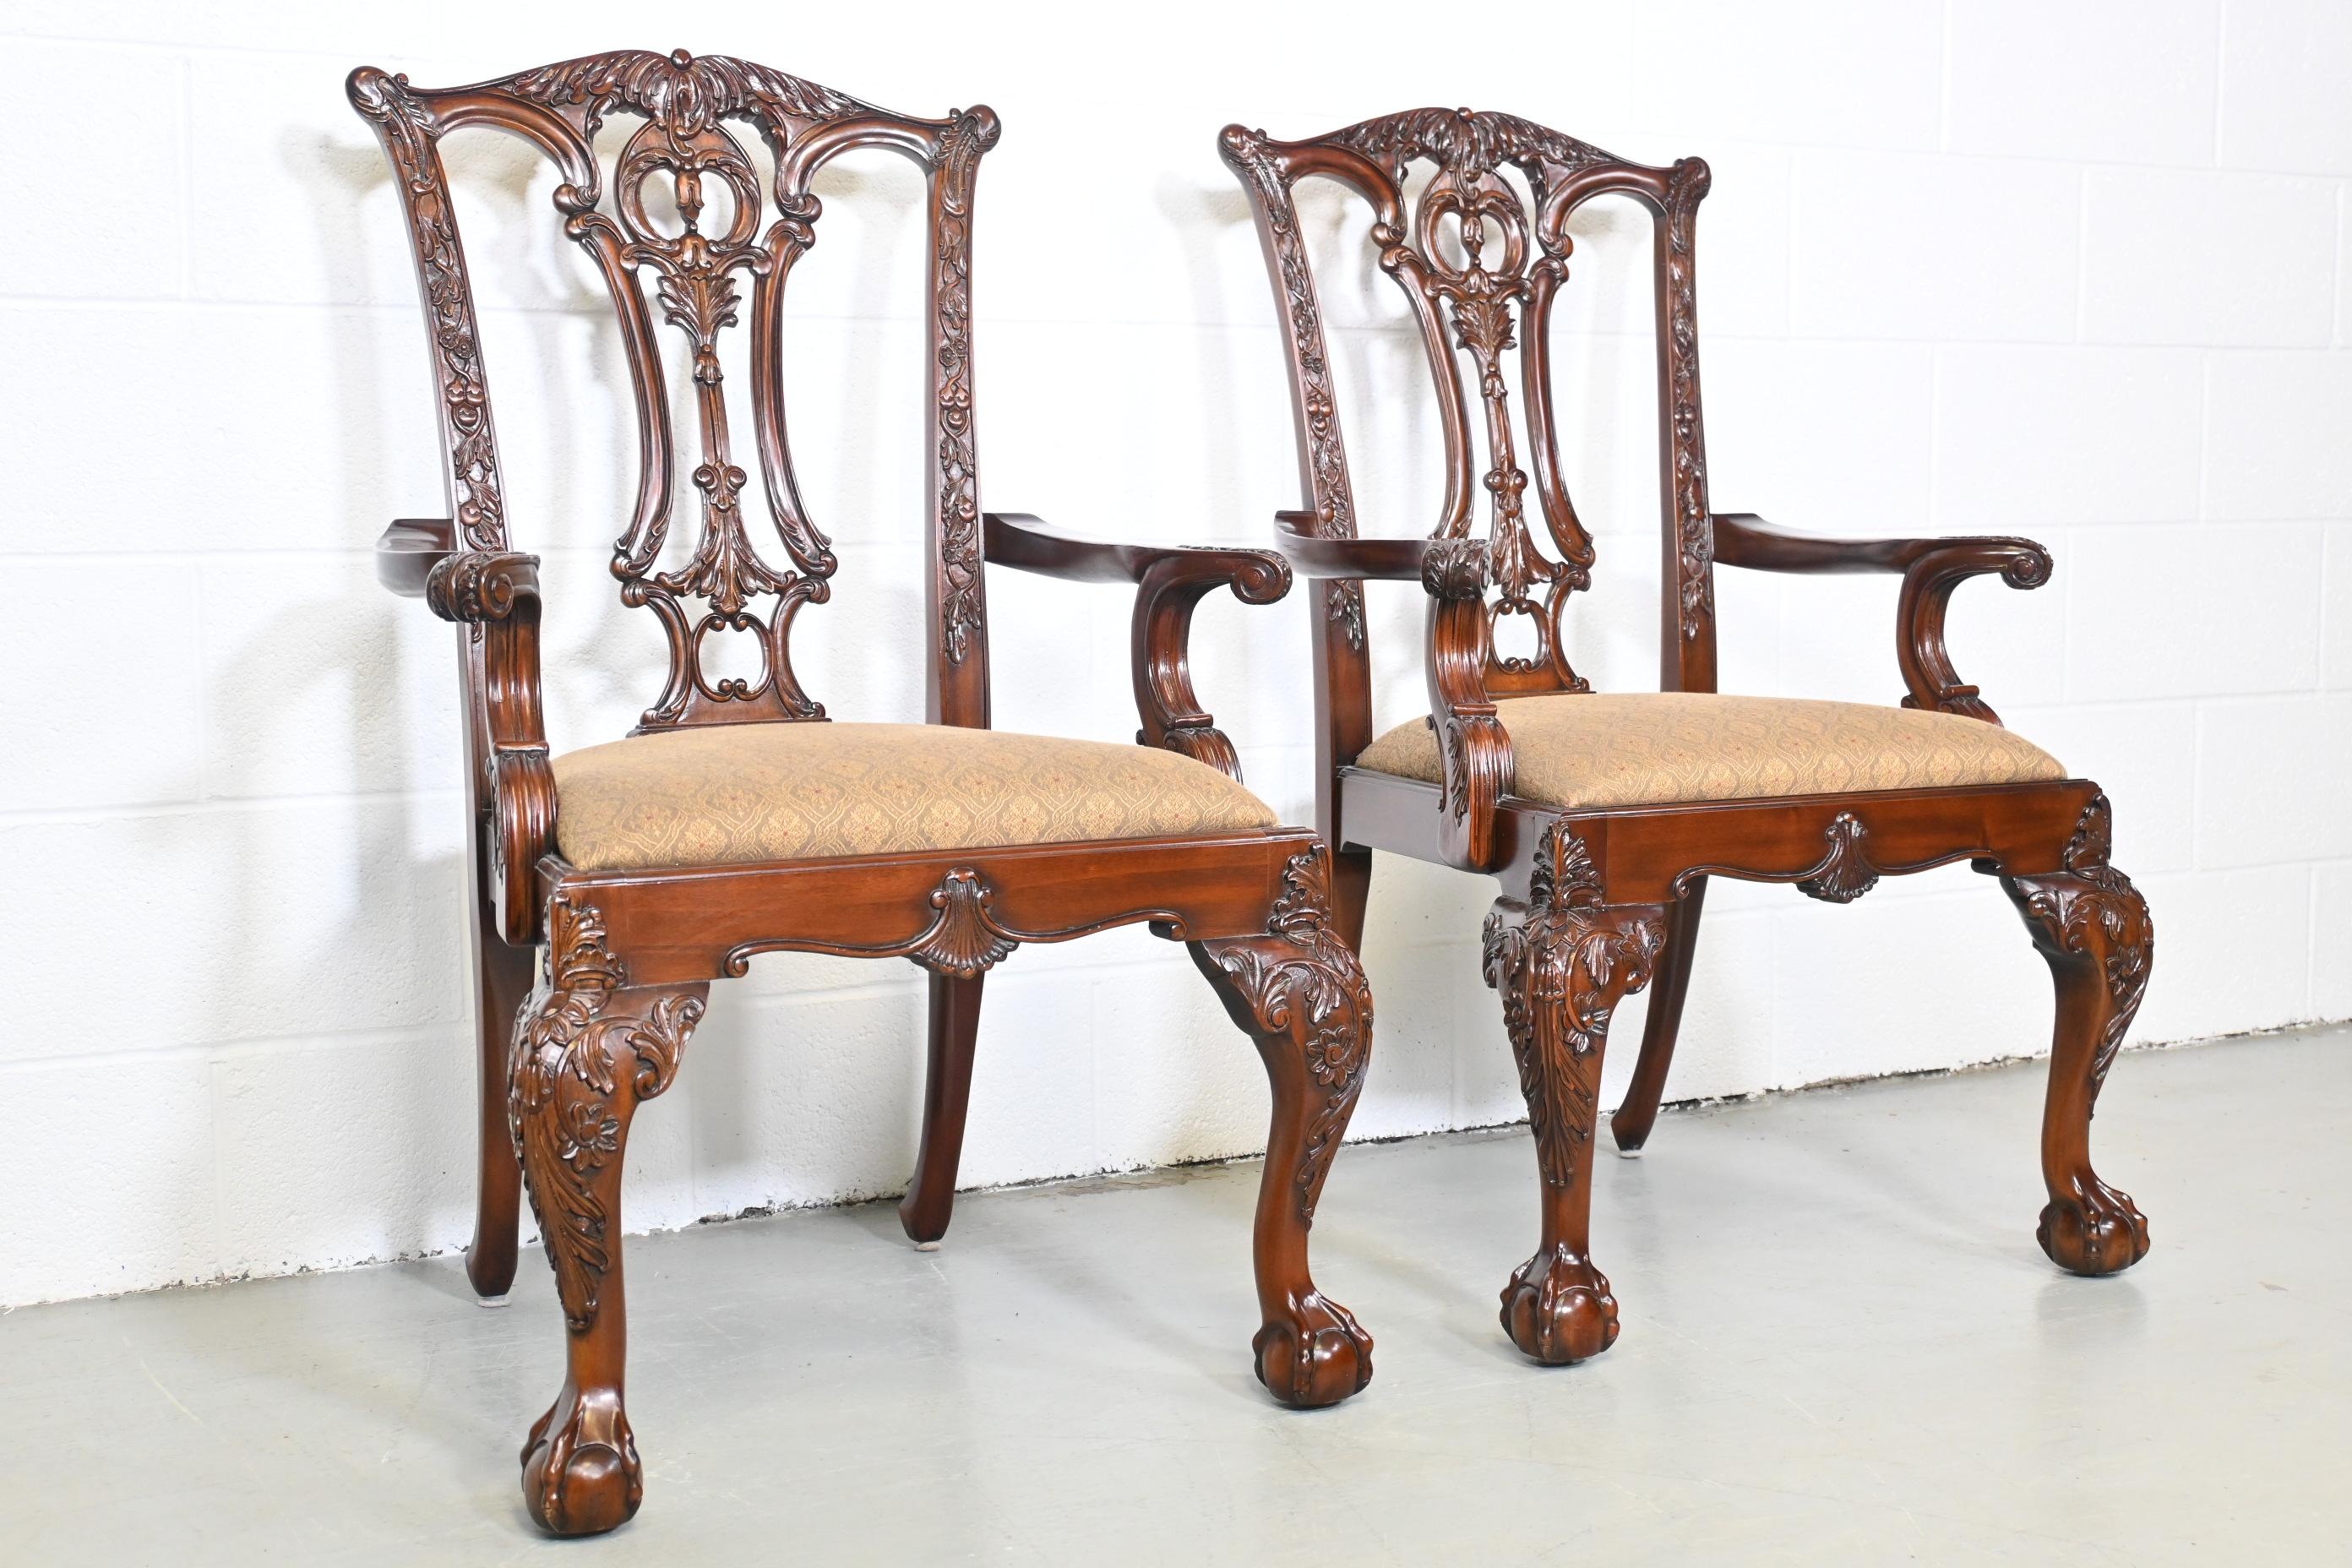 drexel chippendale furniture